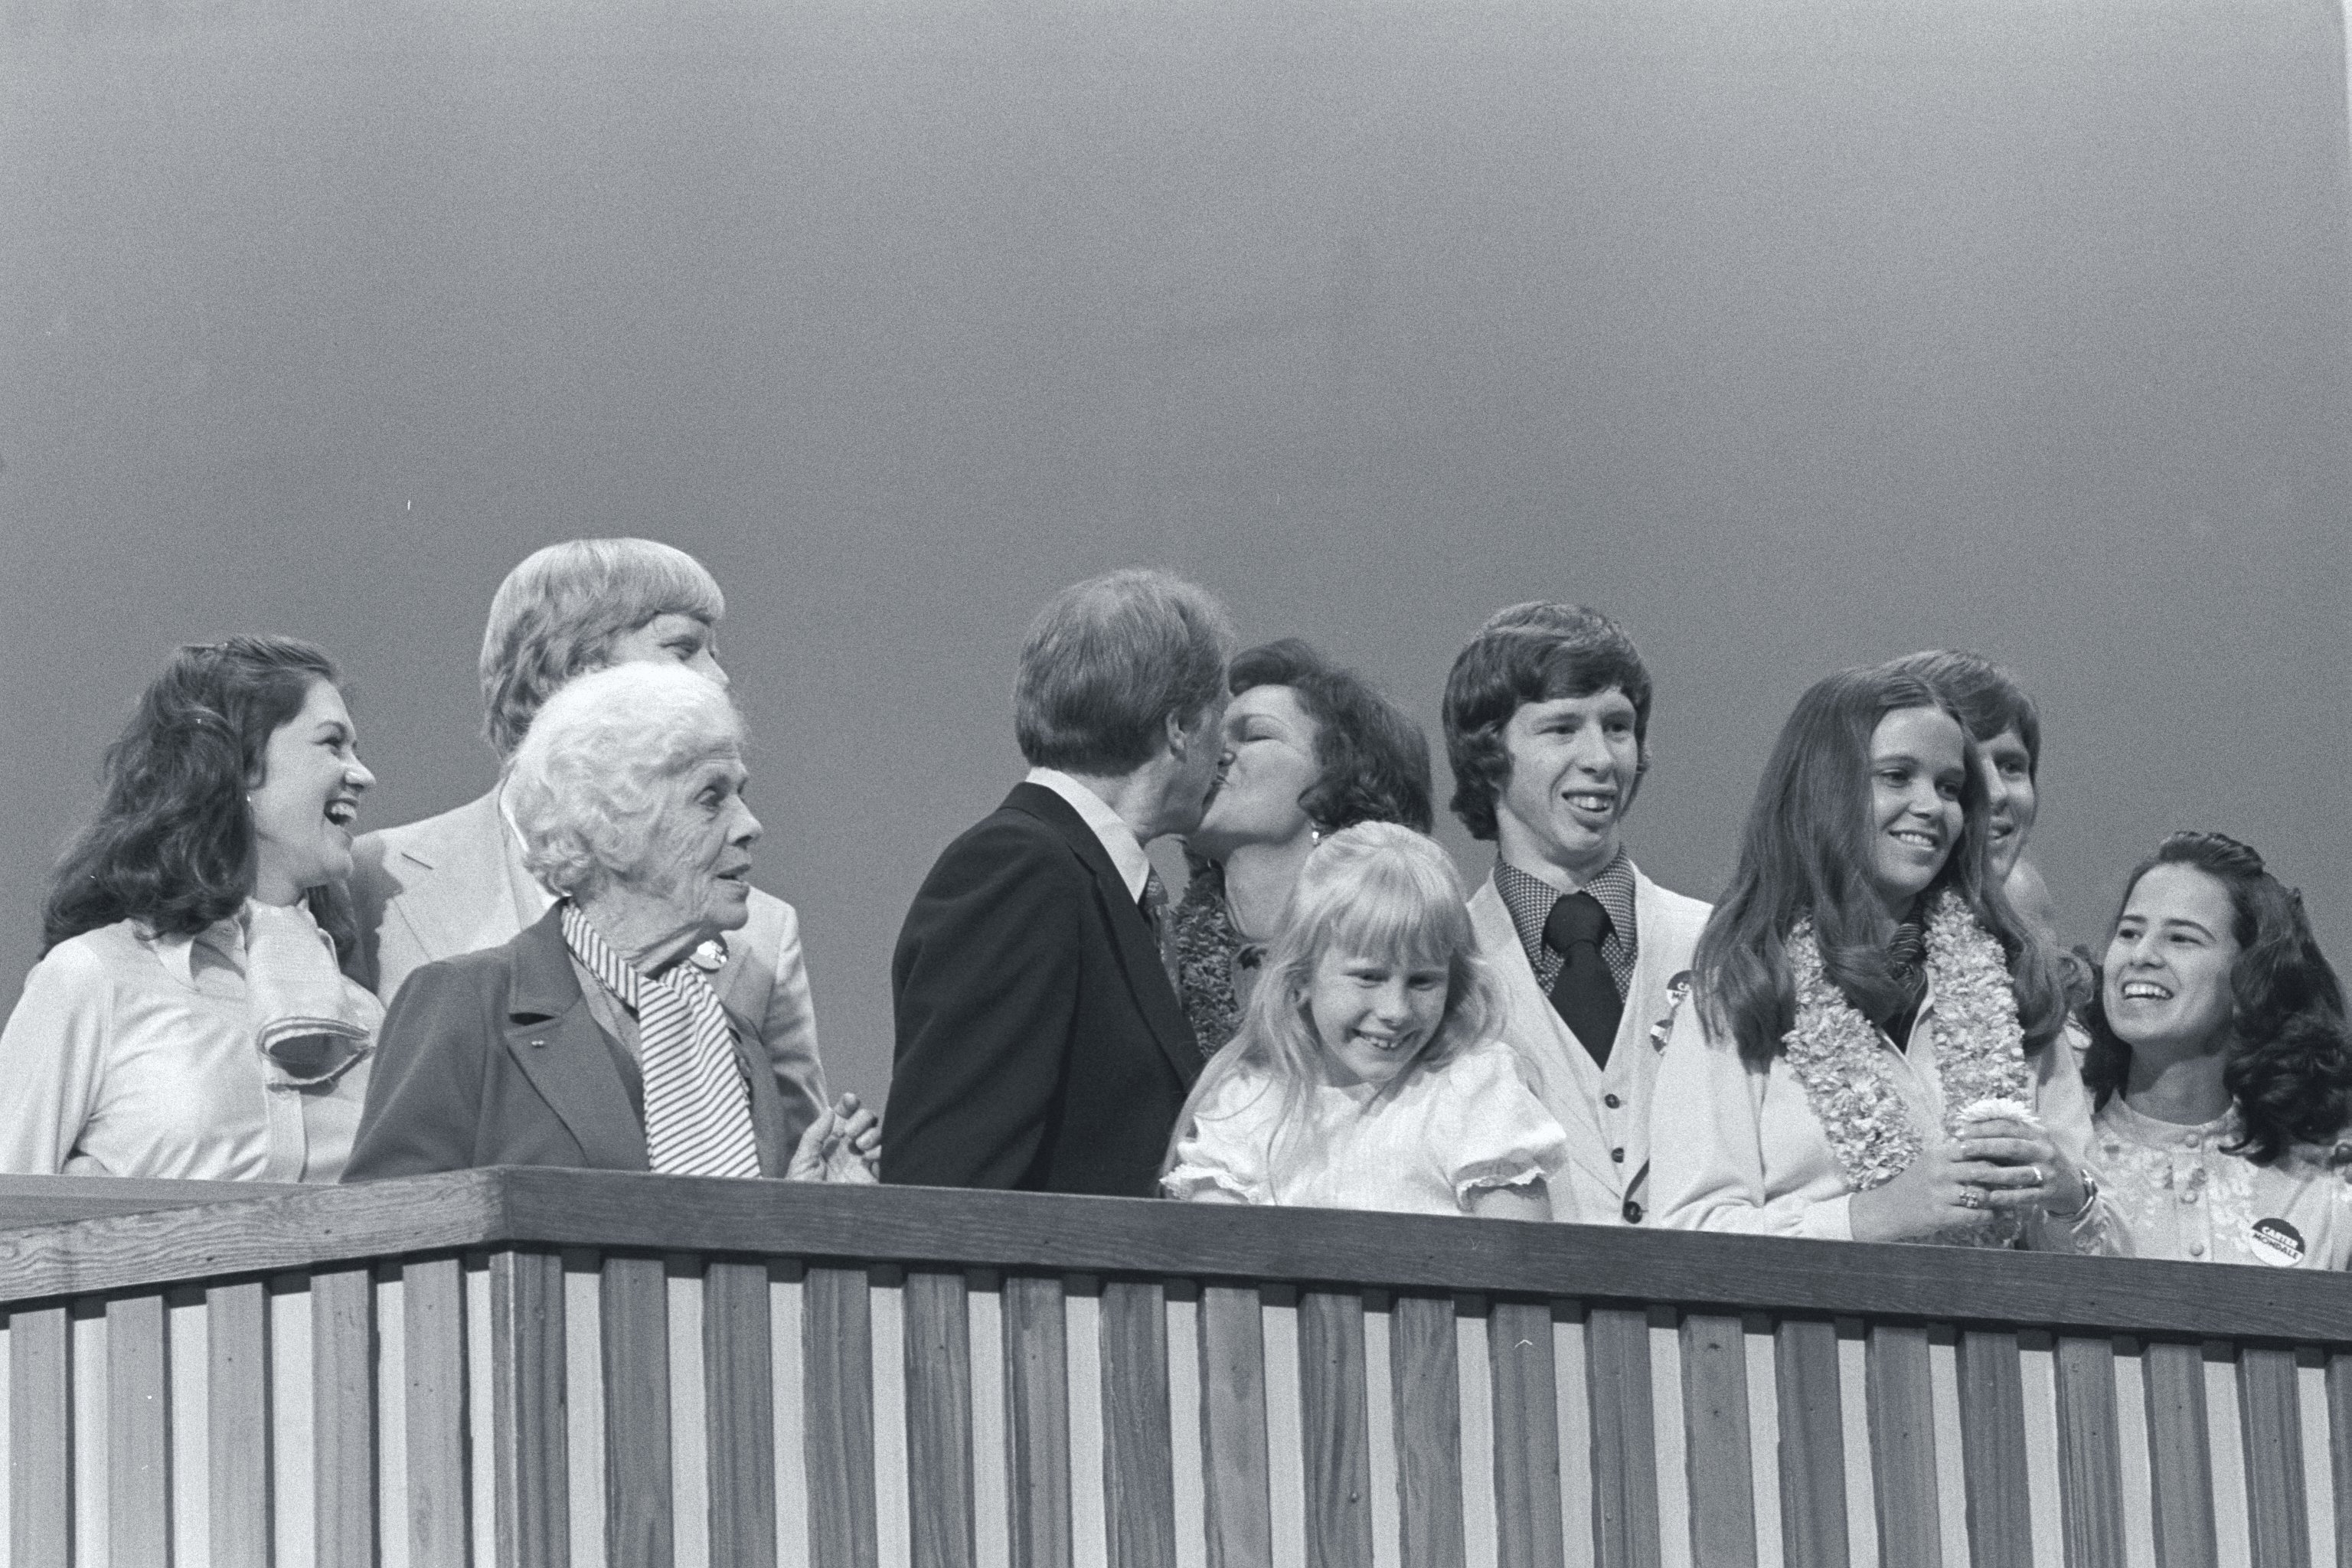 Jimmy Carter kissed his wife, Rosalynn, at the podium with his family by their side at the 1976 Democratic National Convention. | Source: Getty Images